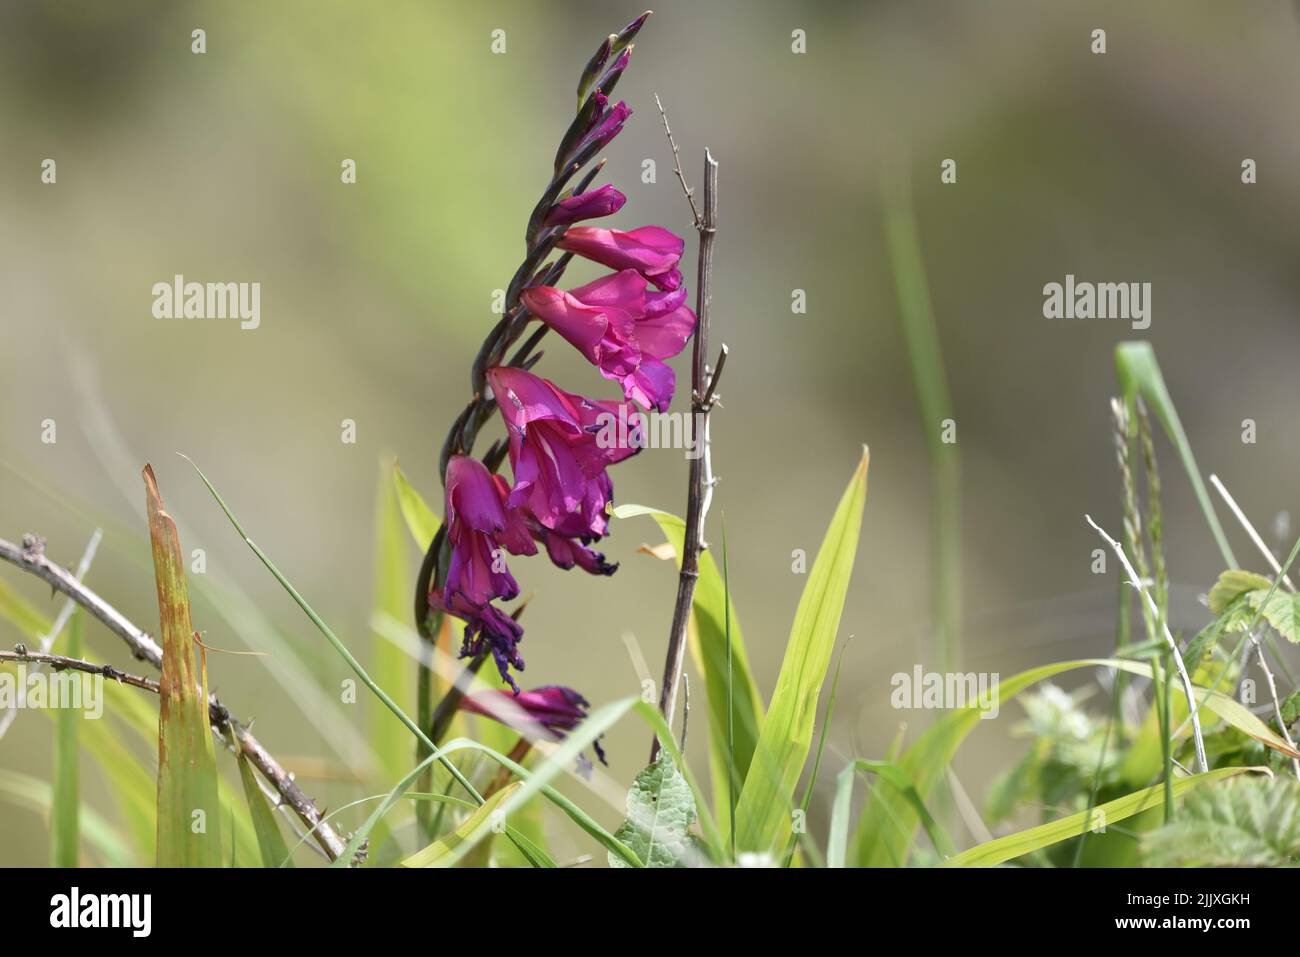 Sunlit Right-Profile Image of a Dying Pink Foxglove Stem and Flowers (Digitalis purpurea) Against a Blurred Grass Background in the UK in June Stock Photo